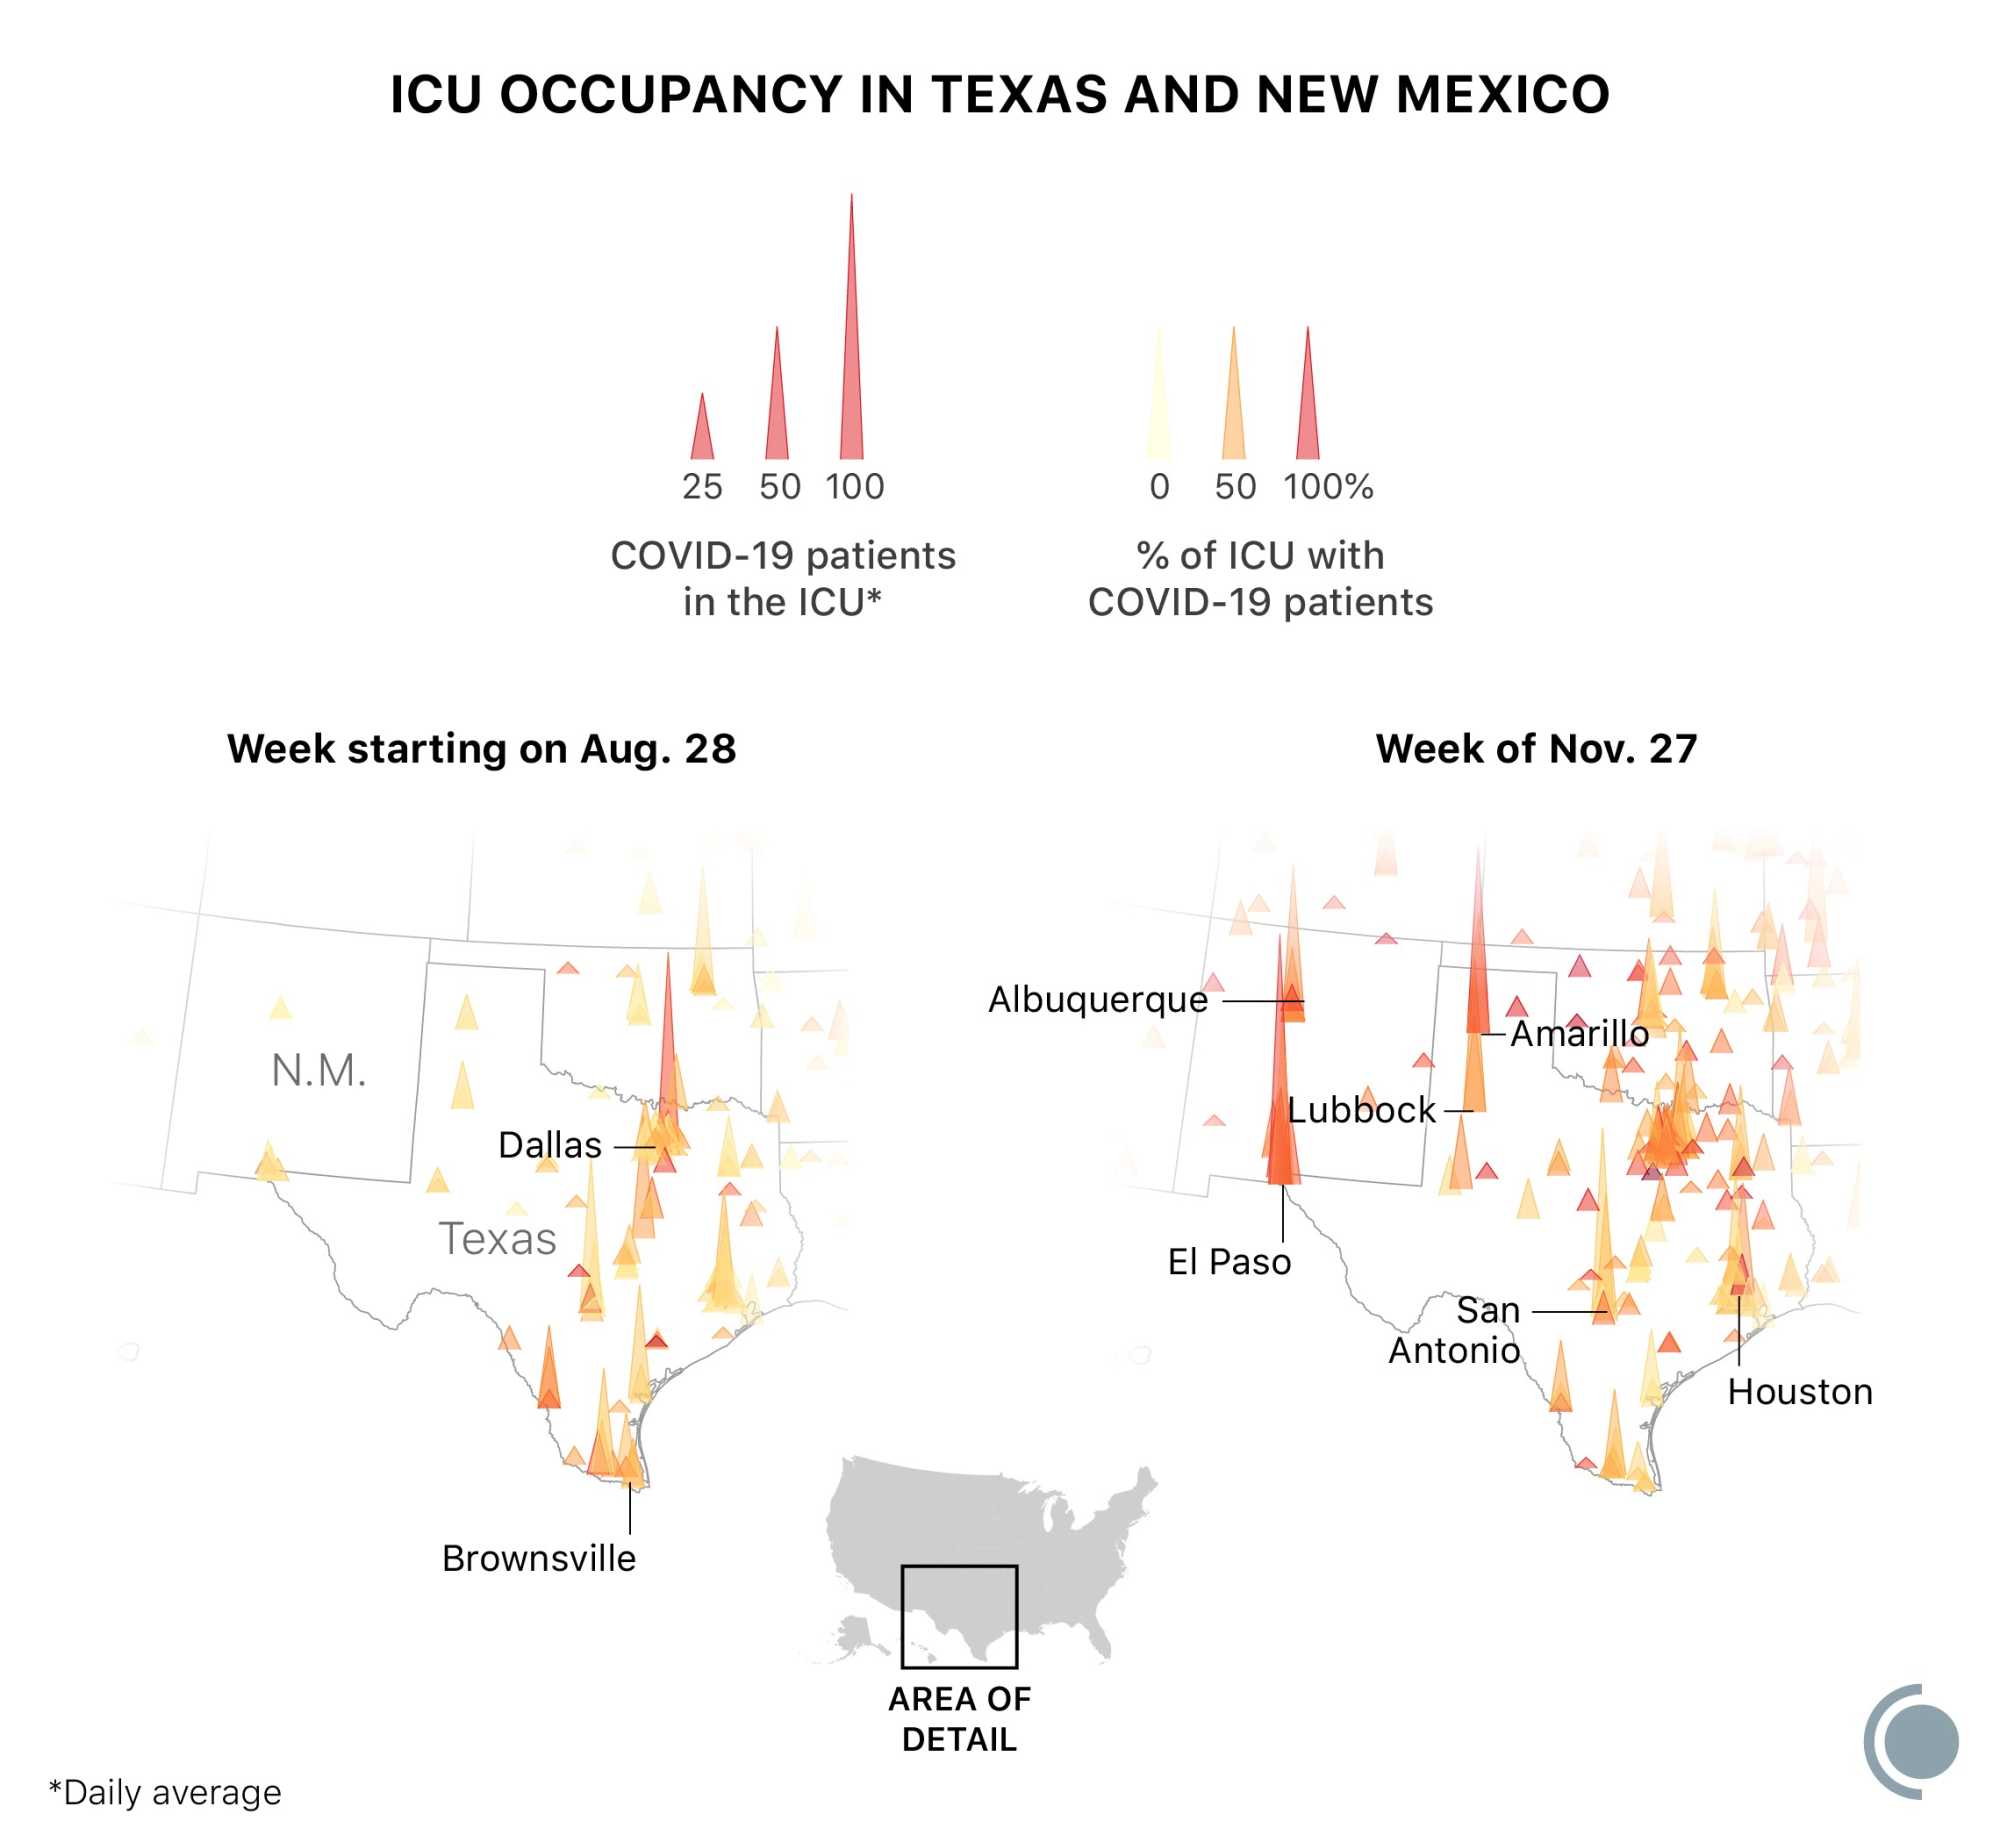 ﻿Maps showing how many COVID-19 patients are in ICUs across the New Mexico/Texas region. From the week of Aug 28 to the week of Nov 27, there has been a drastic increase in the absolute number and percentage of ICU space taken by COVID-19 patients.